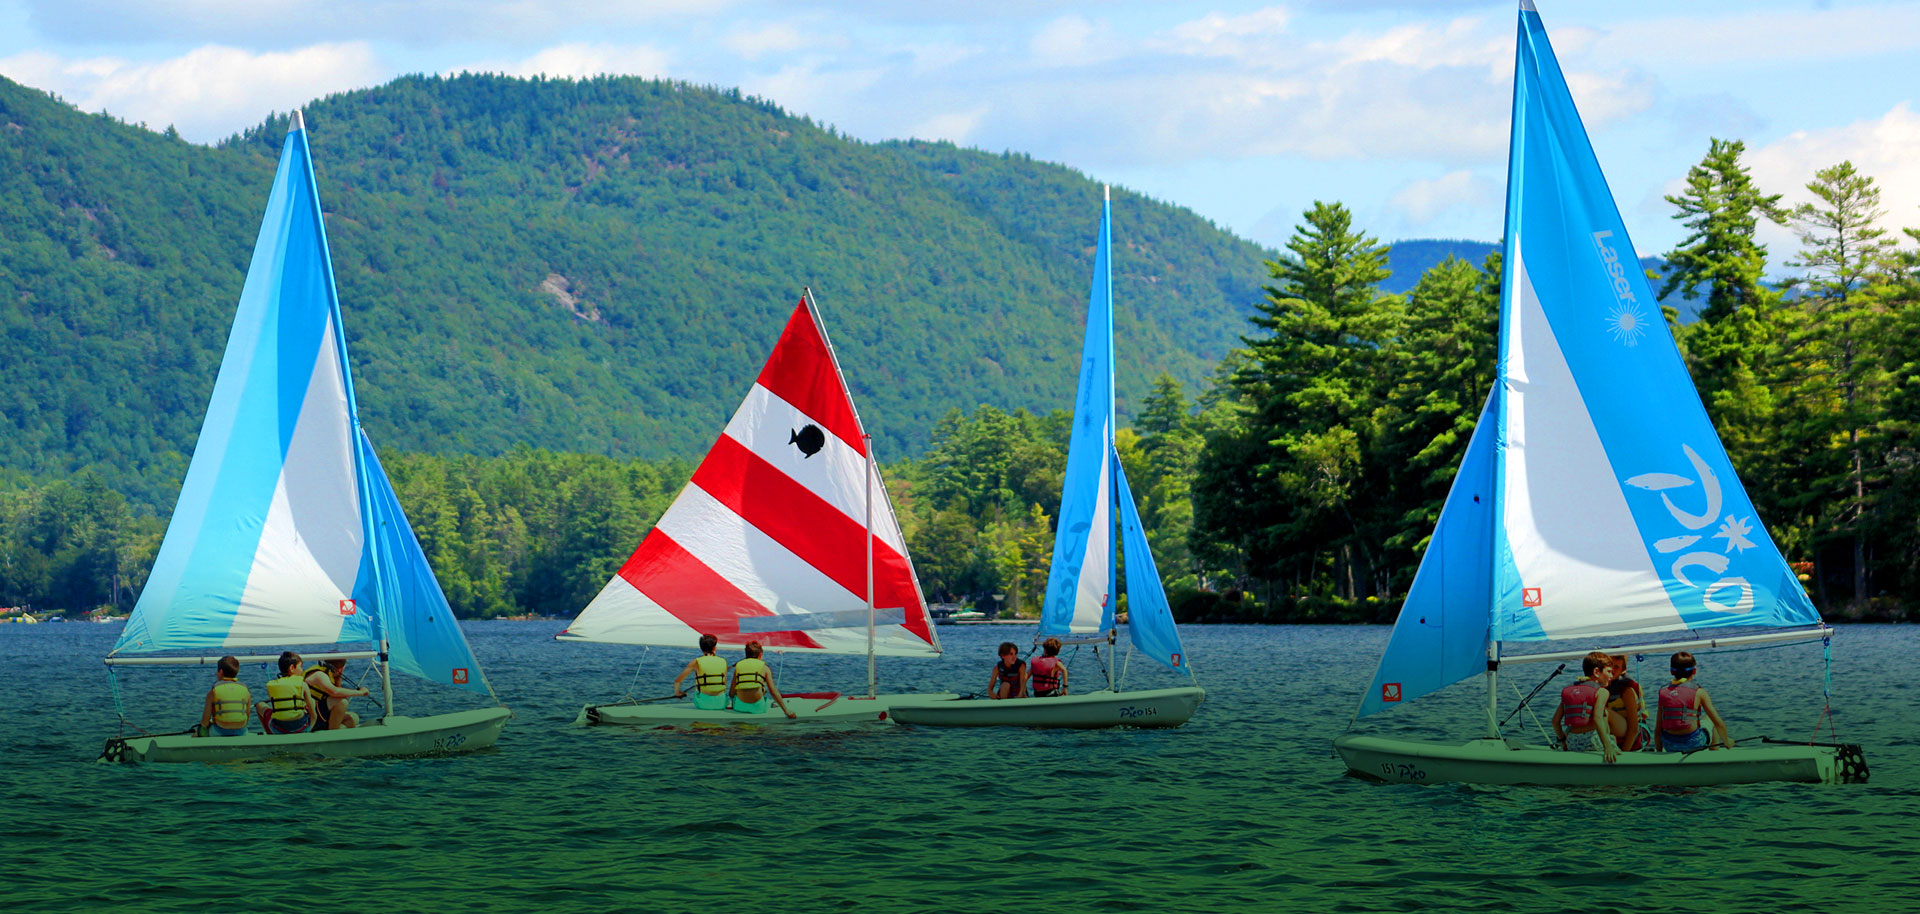 Dates and Fees information for Brant Lake Summer Camp in New York